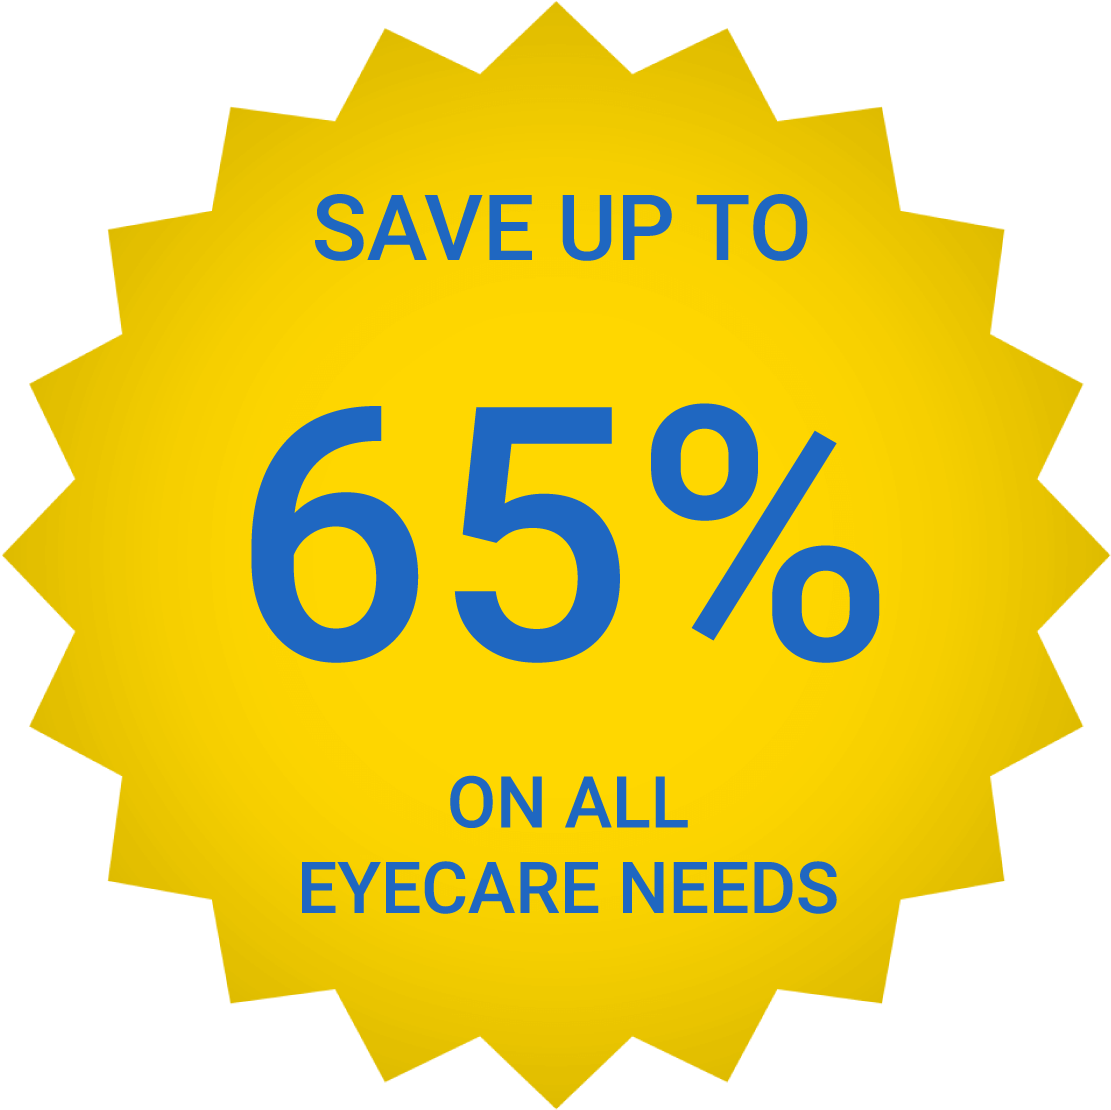 SAVE UP TO 65% ON ALL EYECARE NEEDS